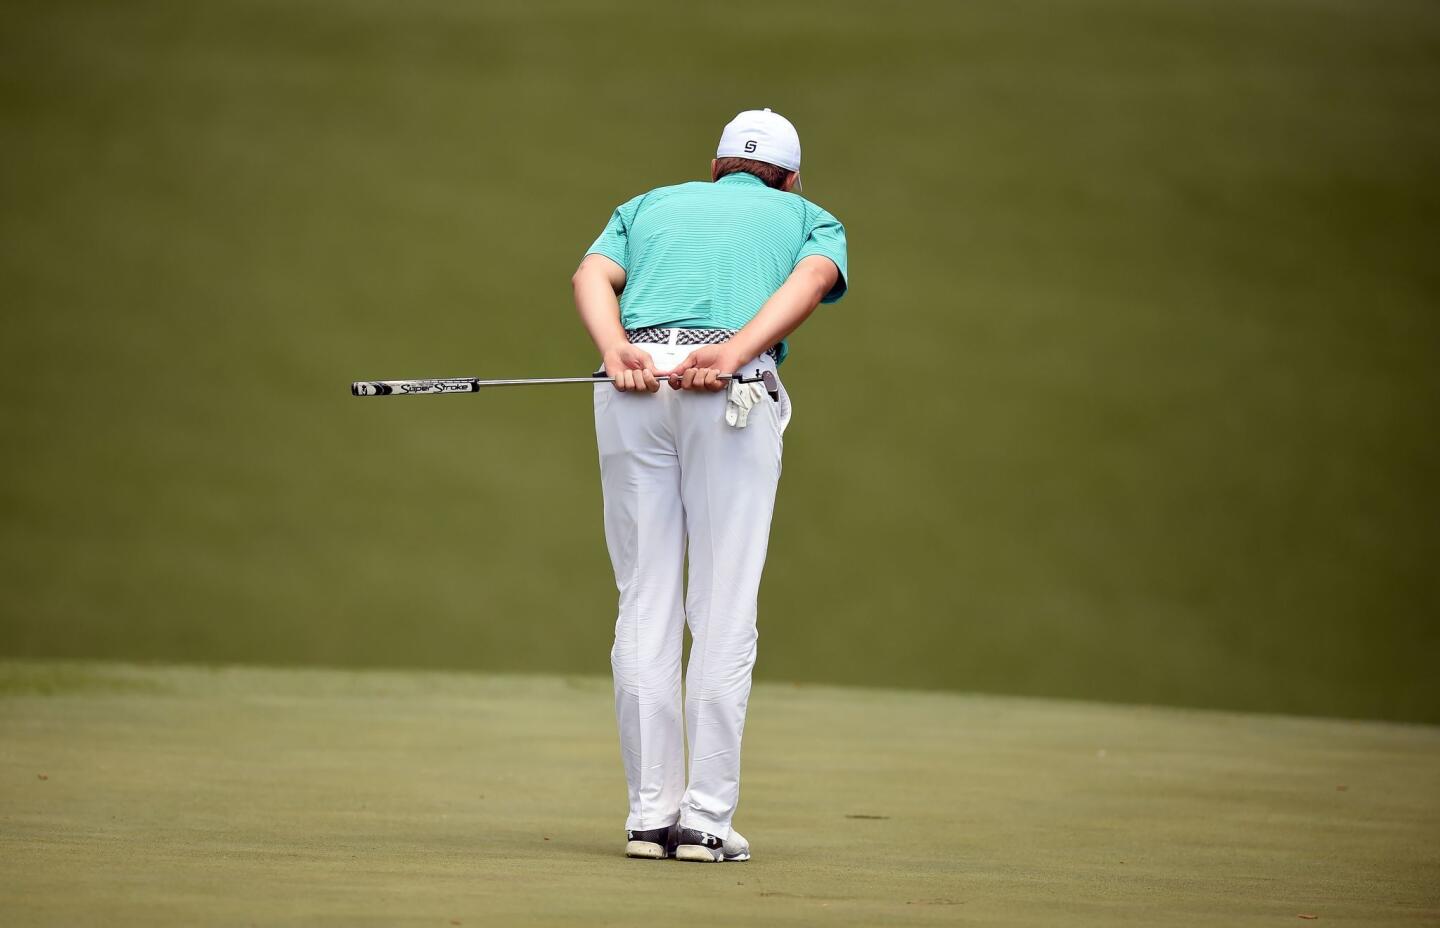 Jordan Spieth lines up a shot during Round 1 of the 80th Masters Golf Tournament at the Augusta National Golf Club.